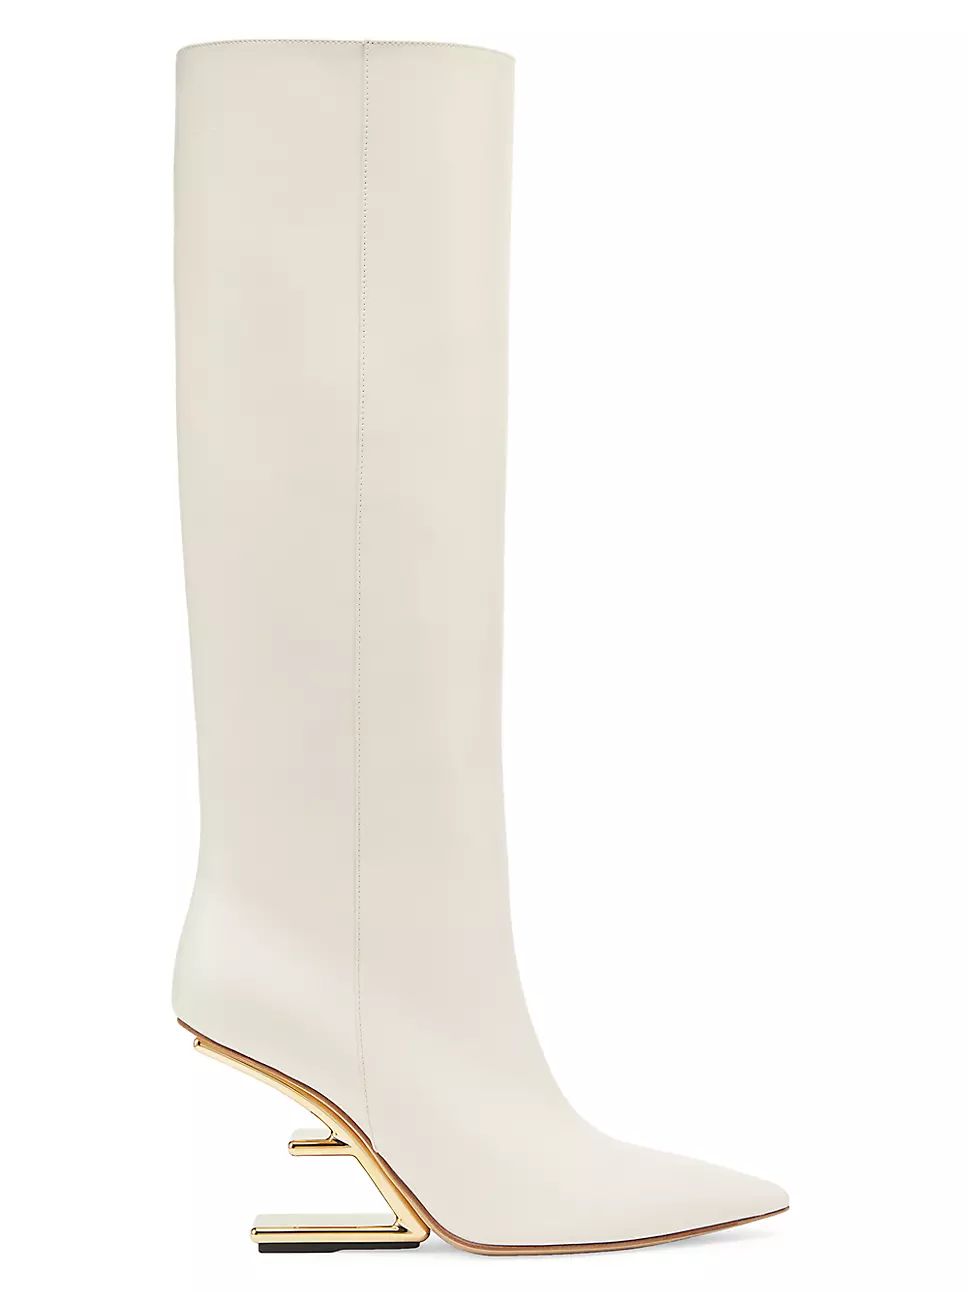 Fendi First Leather Tall Boots | Saks Fifth Avenue